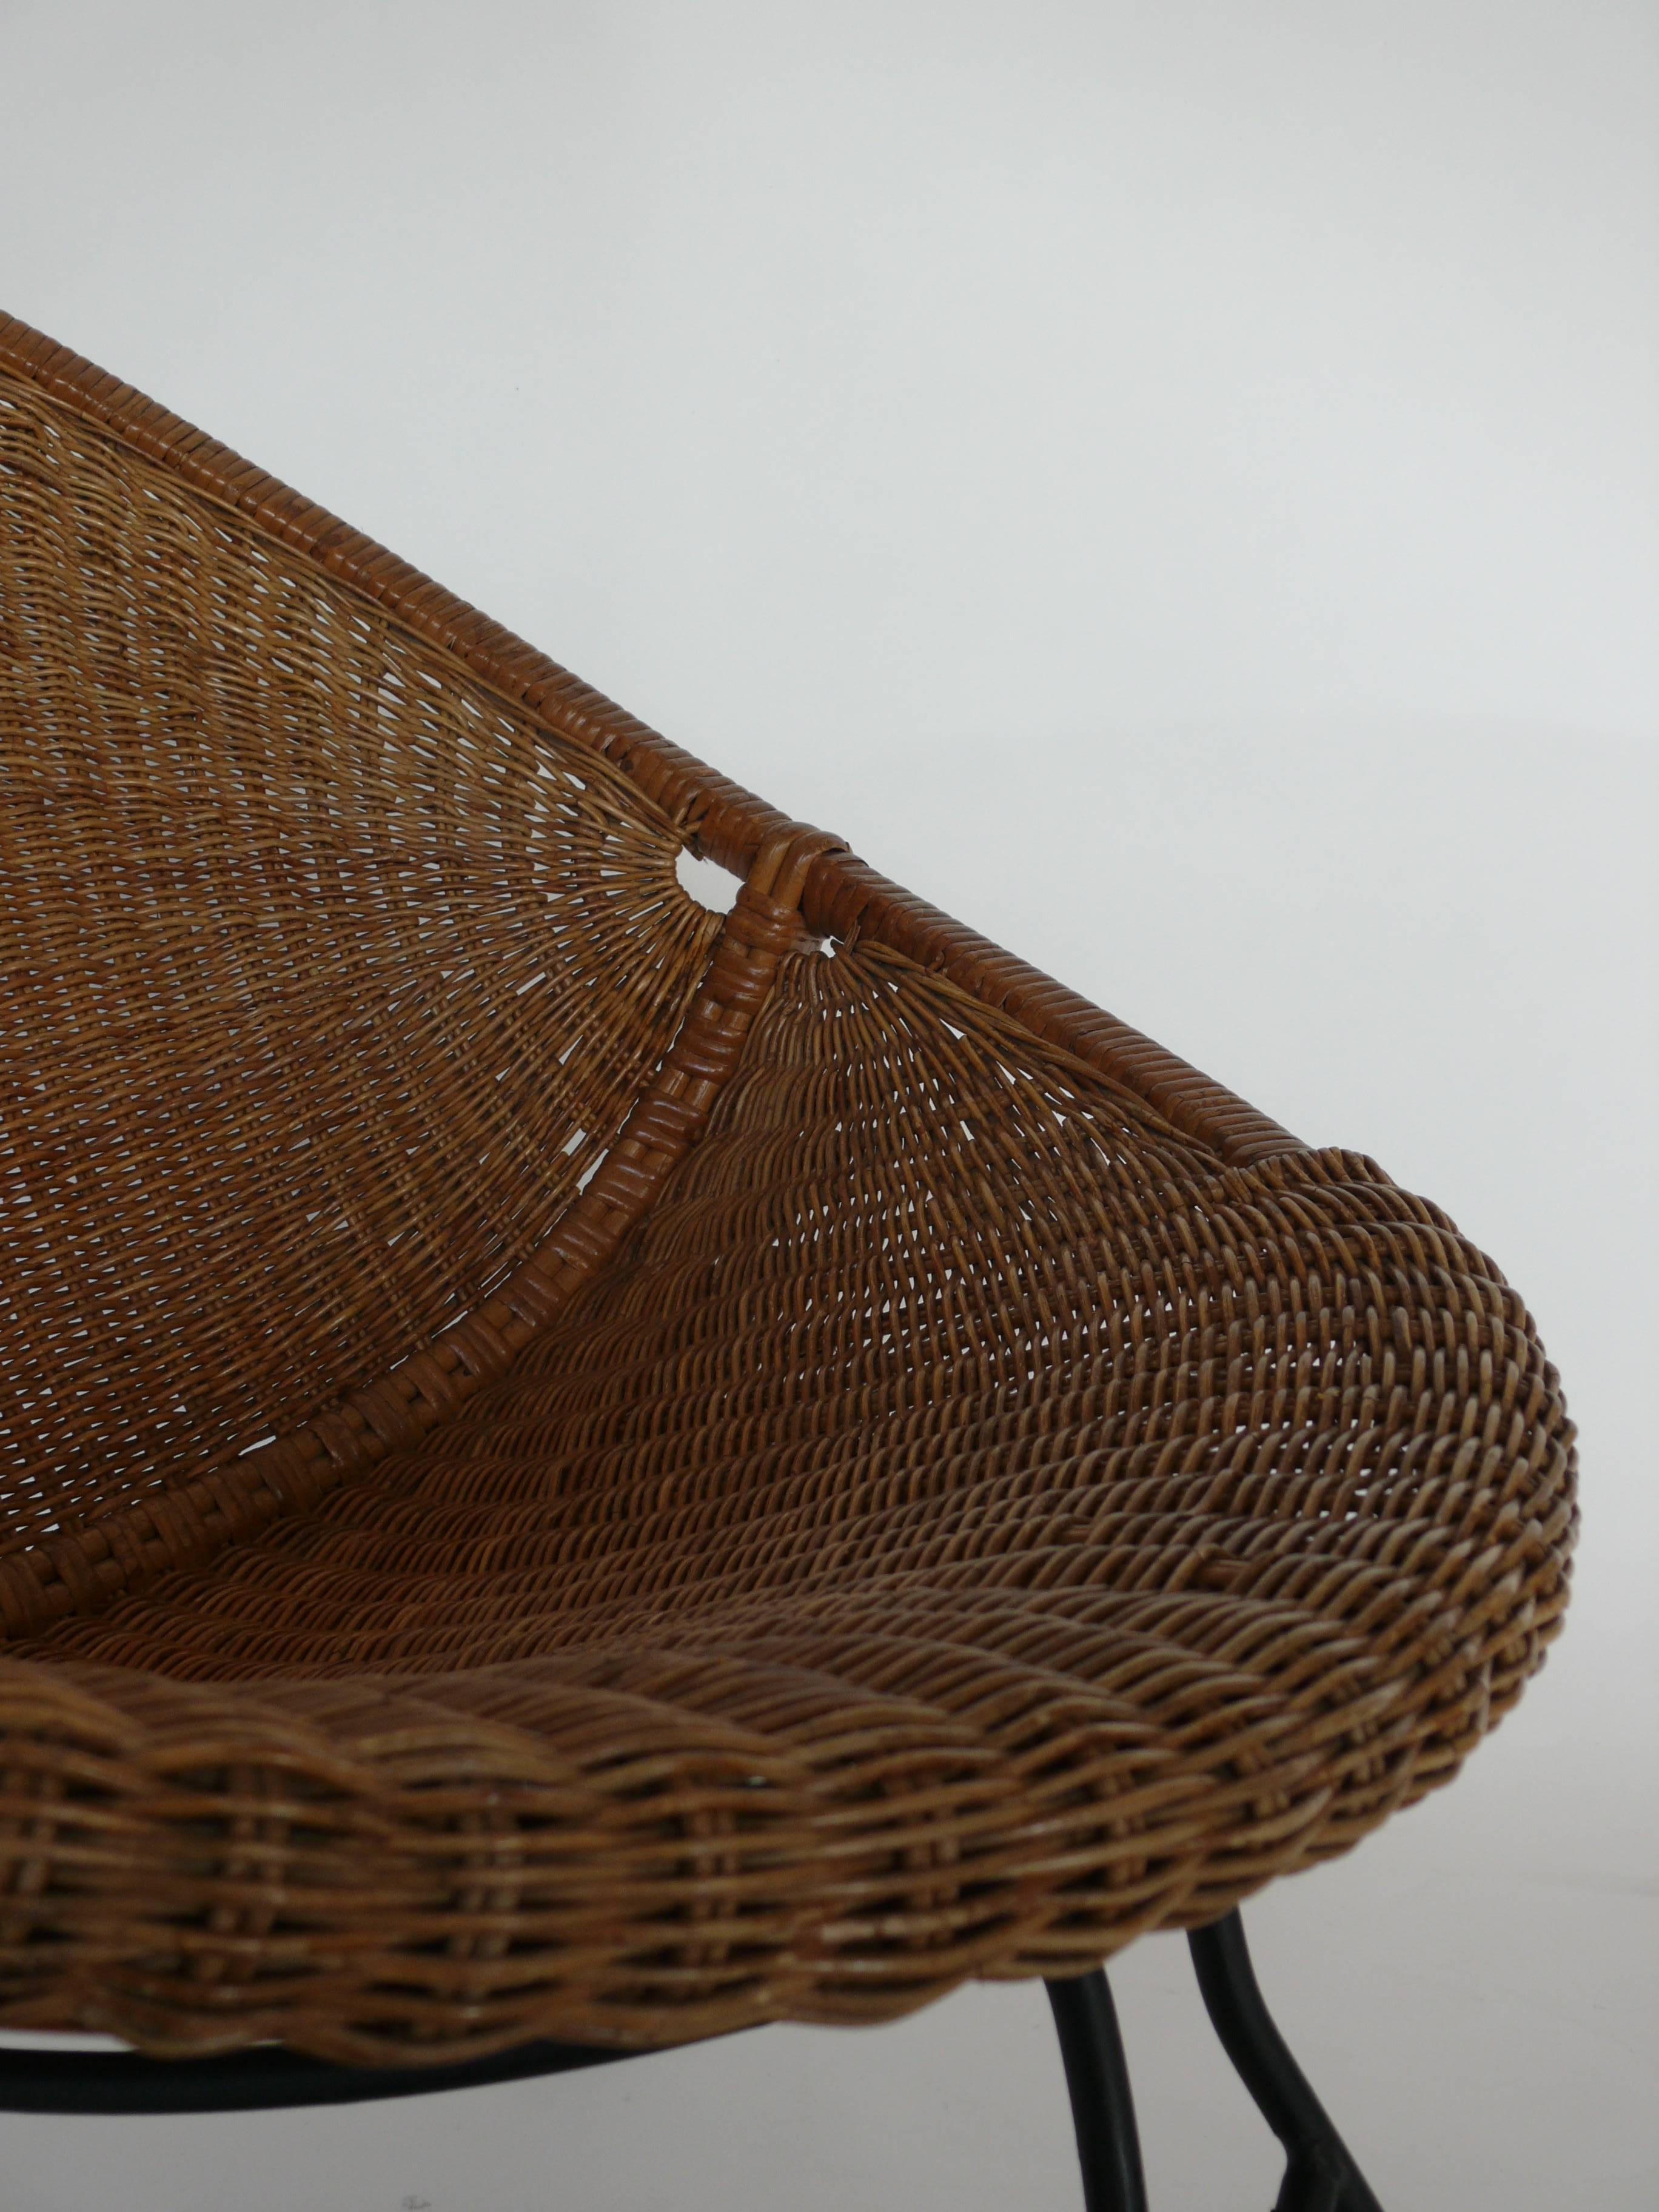 Iron and Wicker Sculptural Chair 2